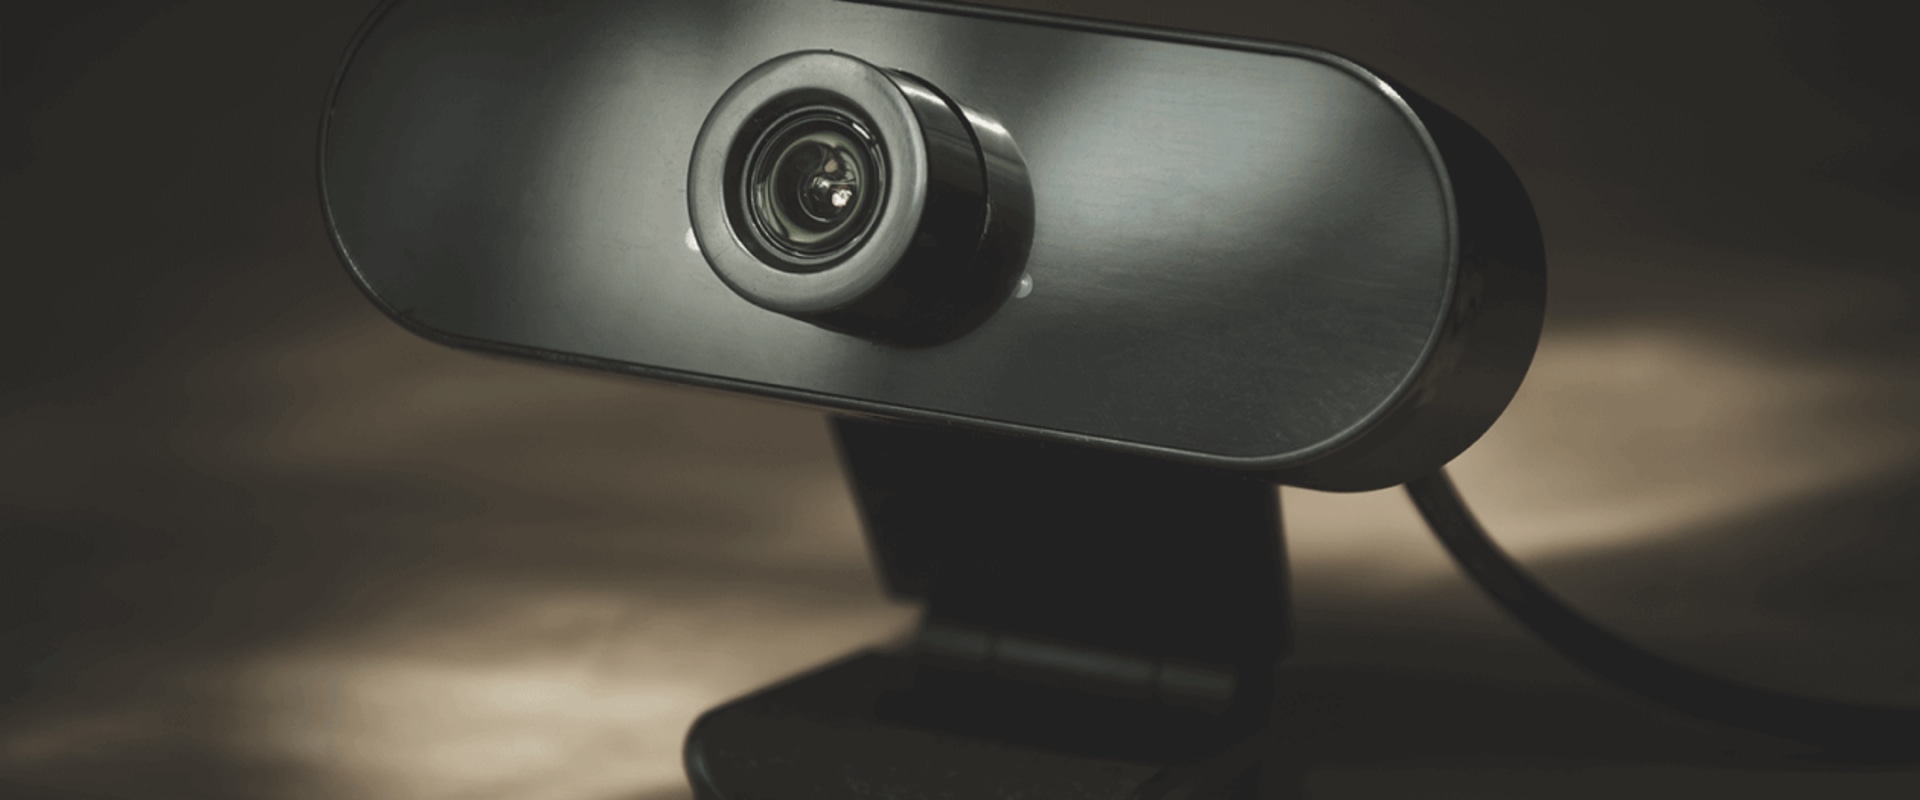 Understanding Software Compatibility for Webcams